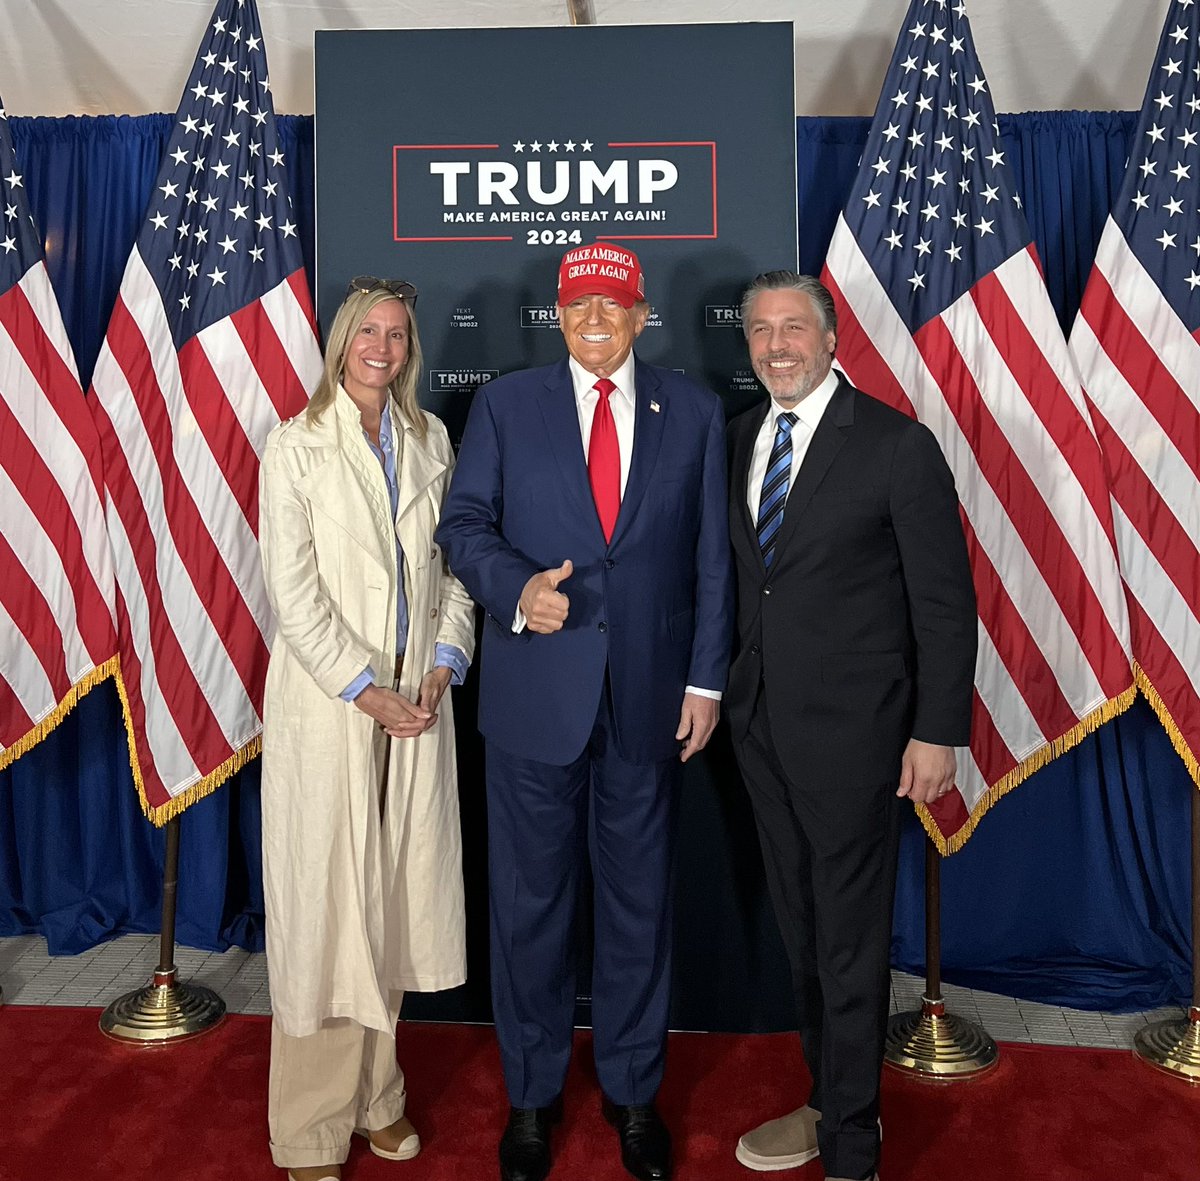 Incredible day in Wildwood with President Trump. The 45th - and soon to be 47th - President was fired up! Proud to have been a supporter since the primaries in 2016. A record turnout on the beach!